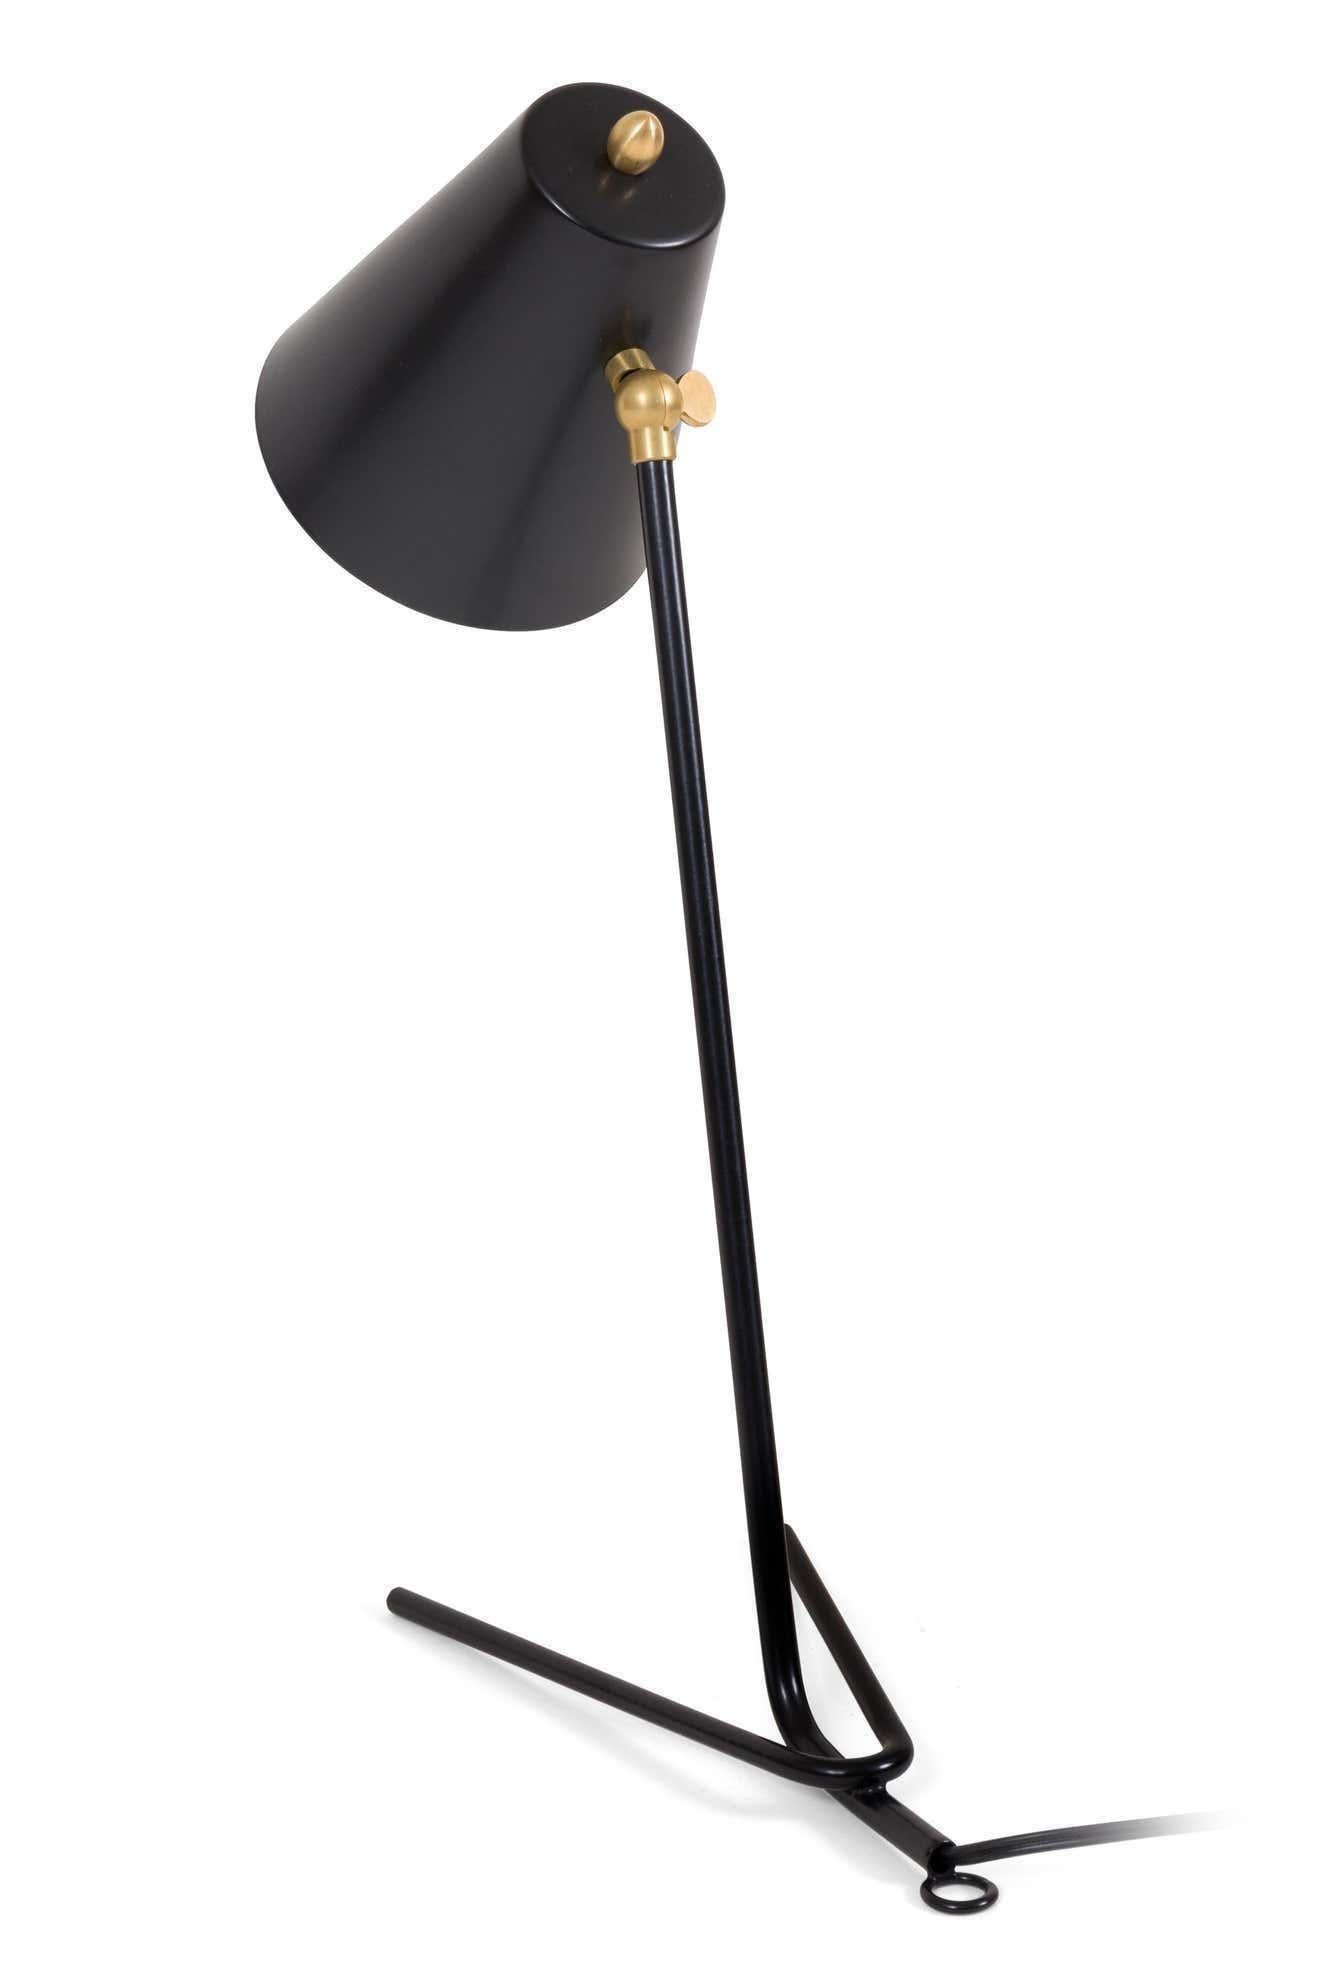 Painted Black Articulating Mid-Century Style Italian Desk Lamp or Wall Light